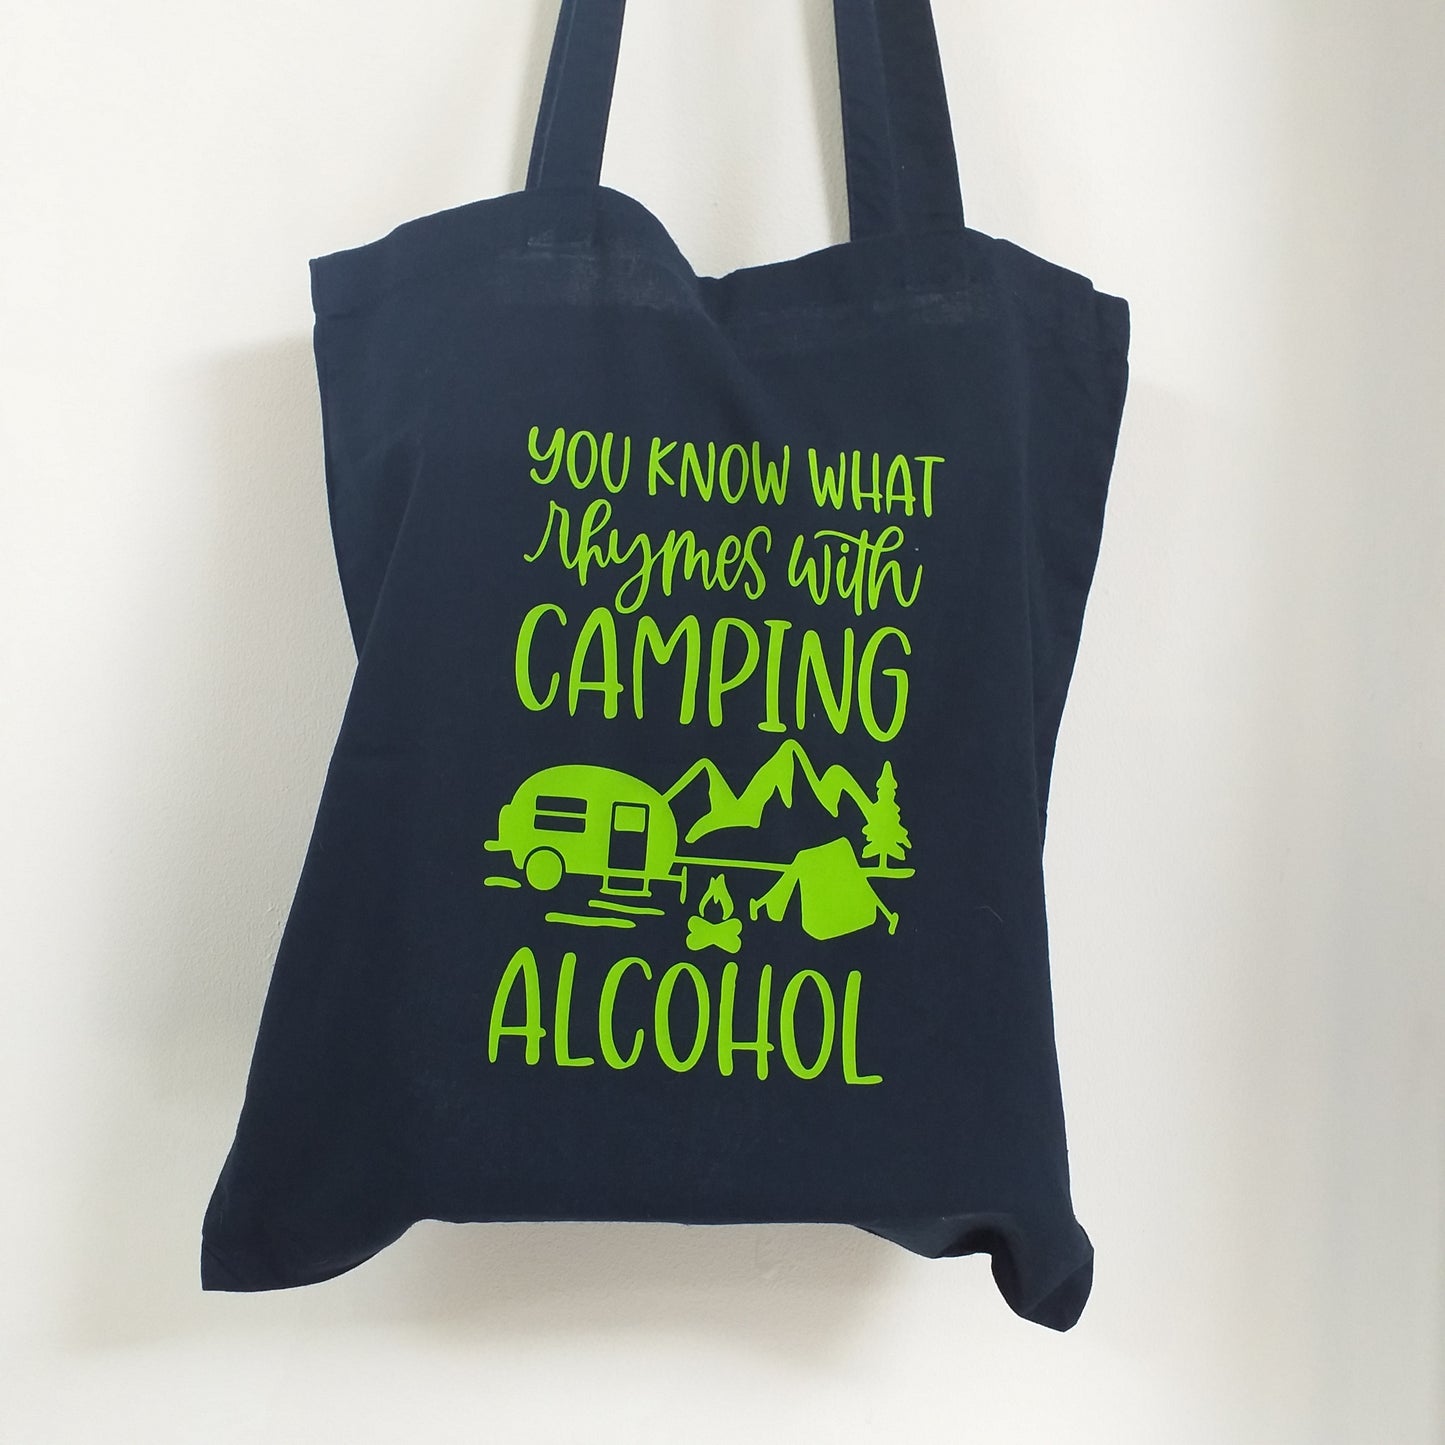 Tote bag for thirsty campers!